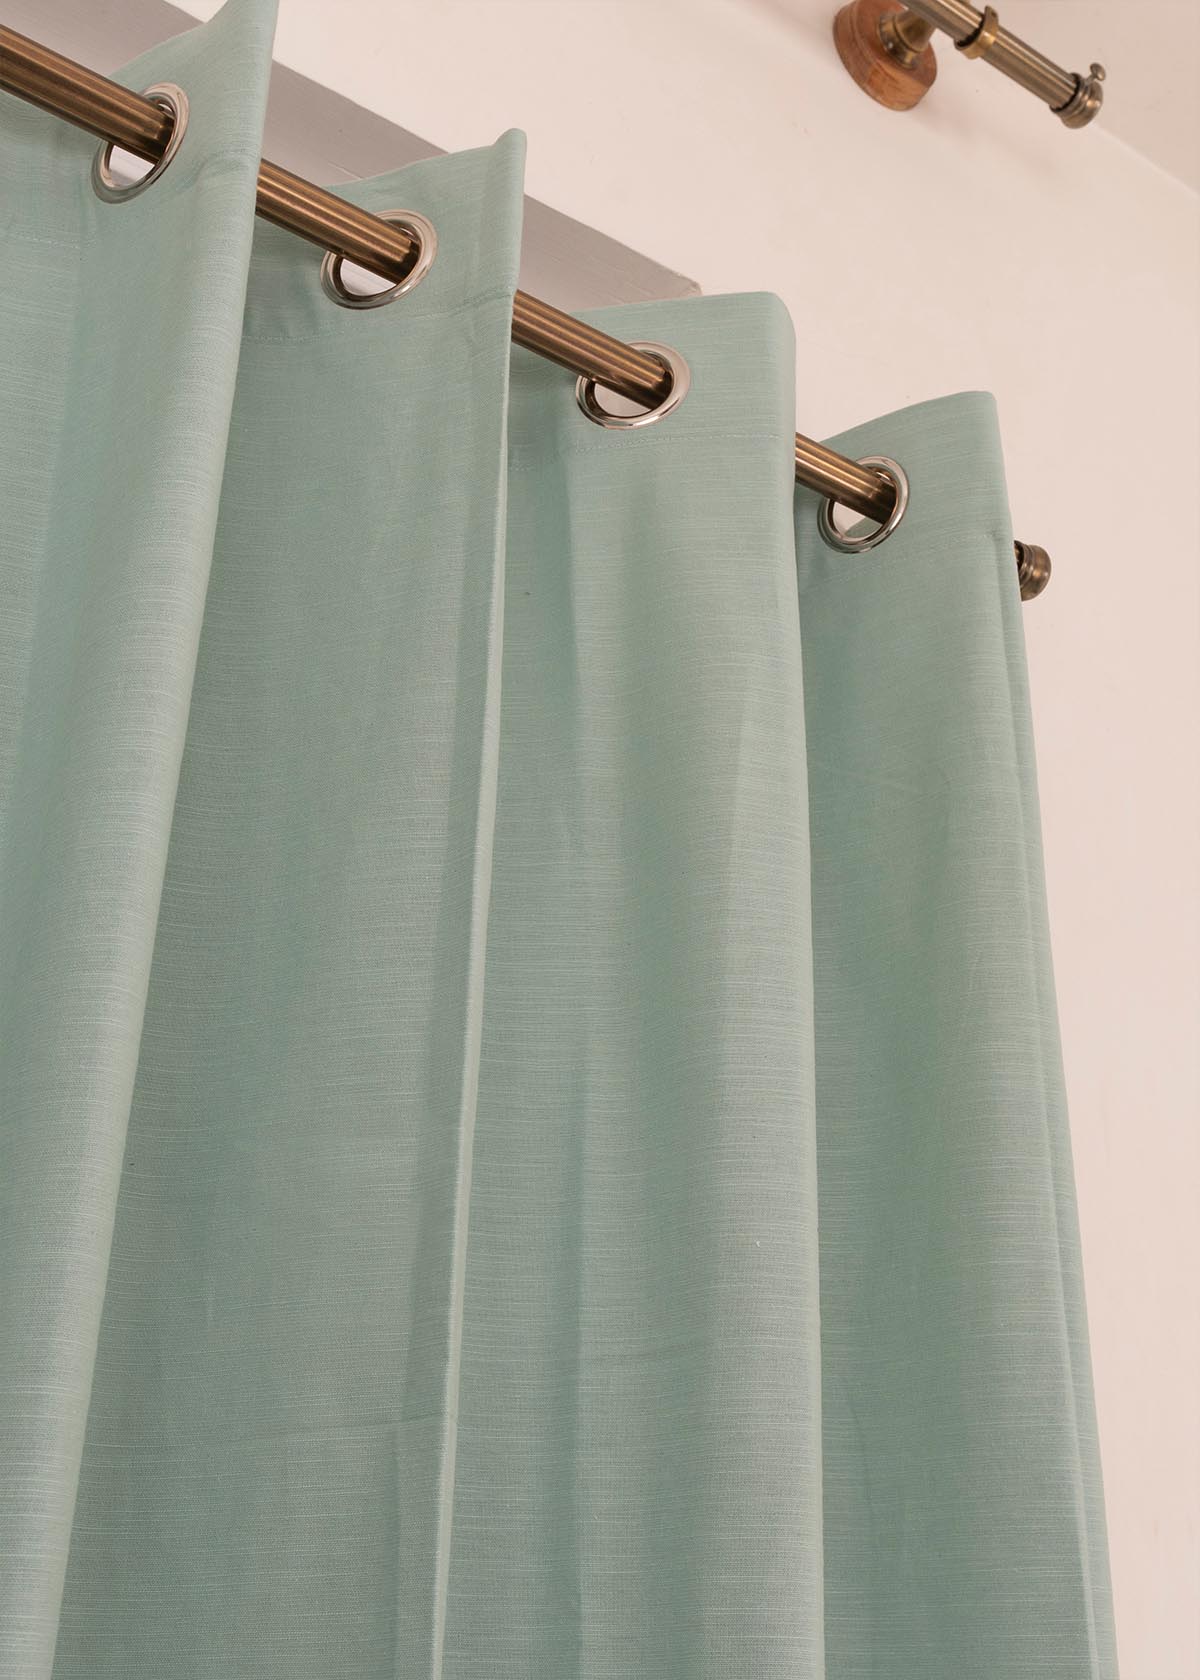 Solid Nile Blue 100% Customizable Cotton plain curtain for bedroom - Room darkening